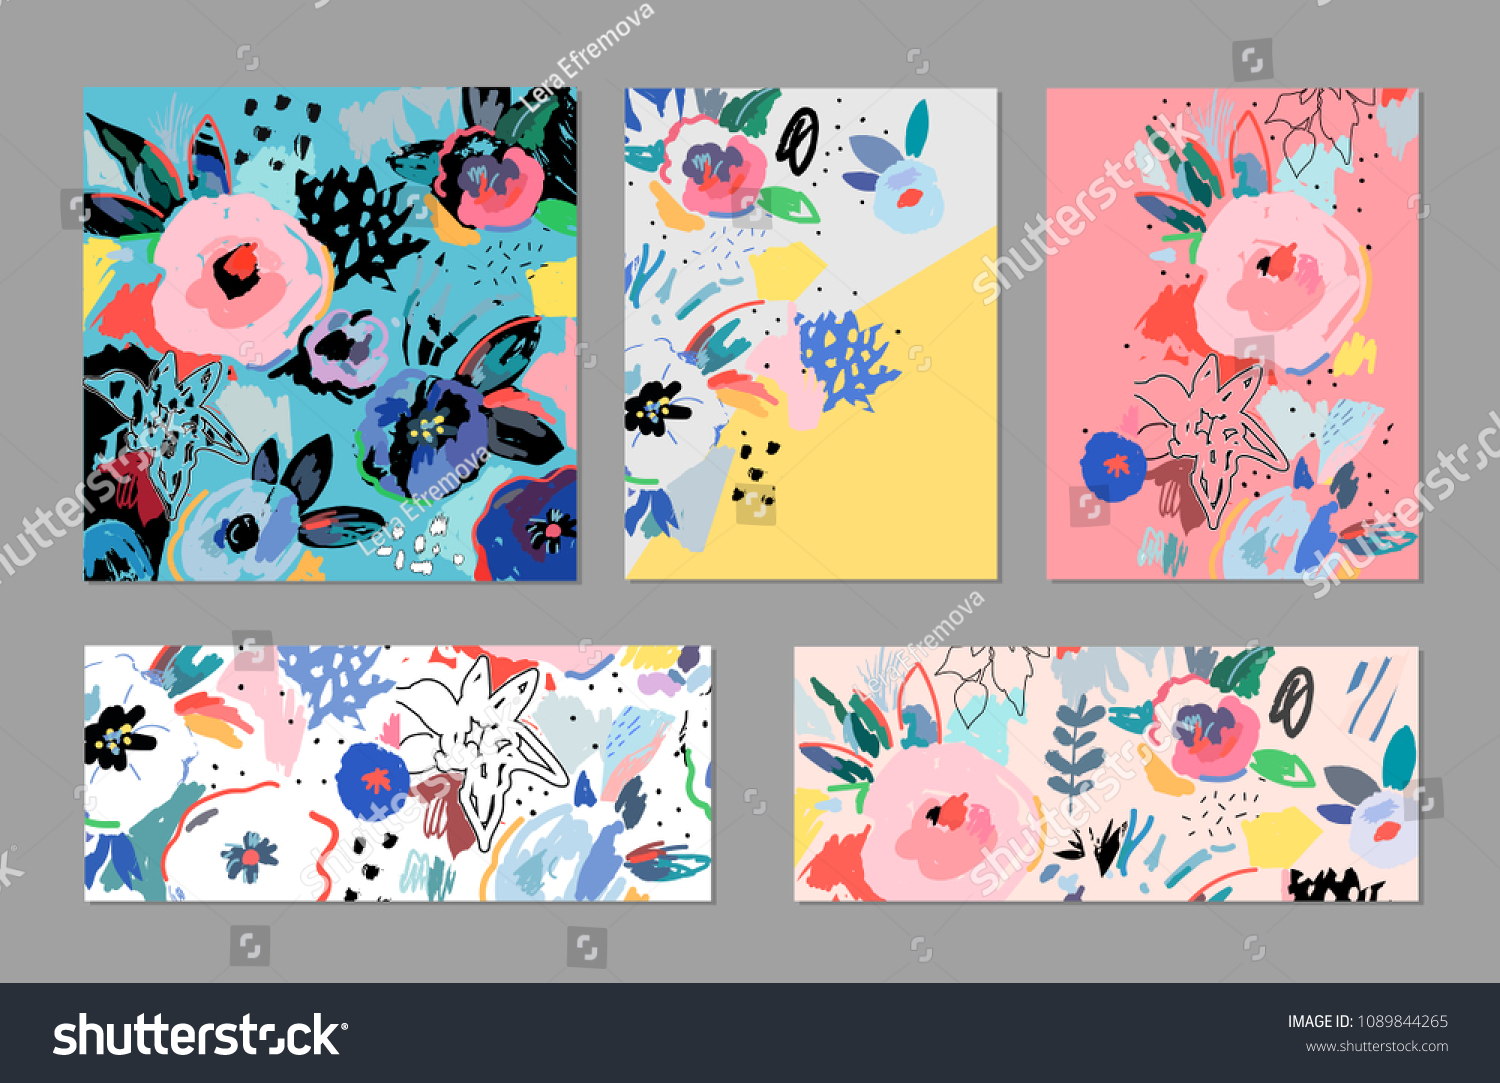 stock-vector-creative-universal-artistic-cards-trendy-graphic-design-for-banner-poster-cover-invitation-1089844265